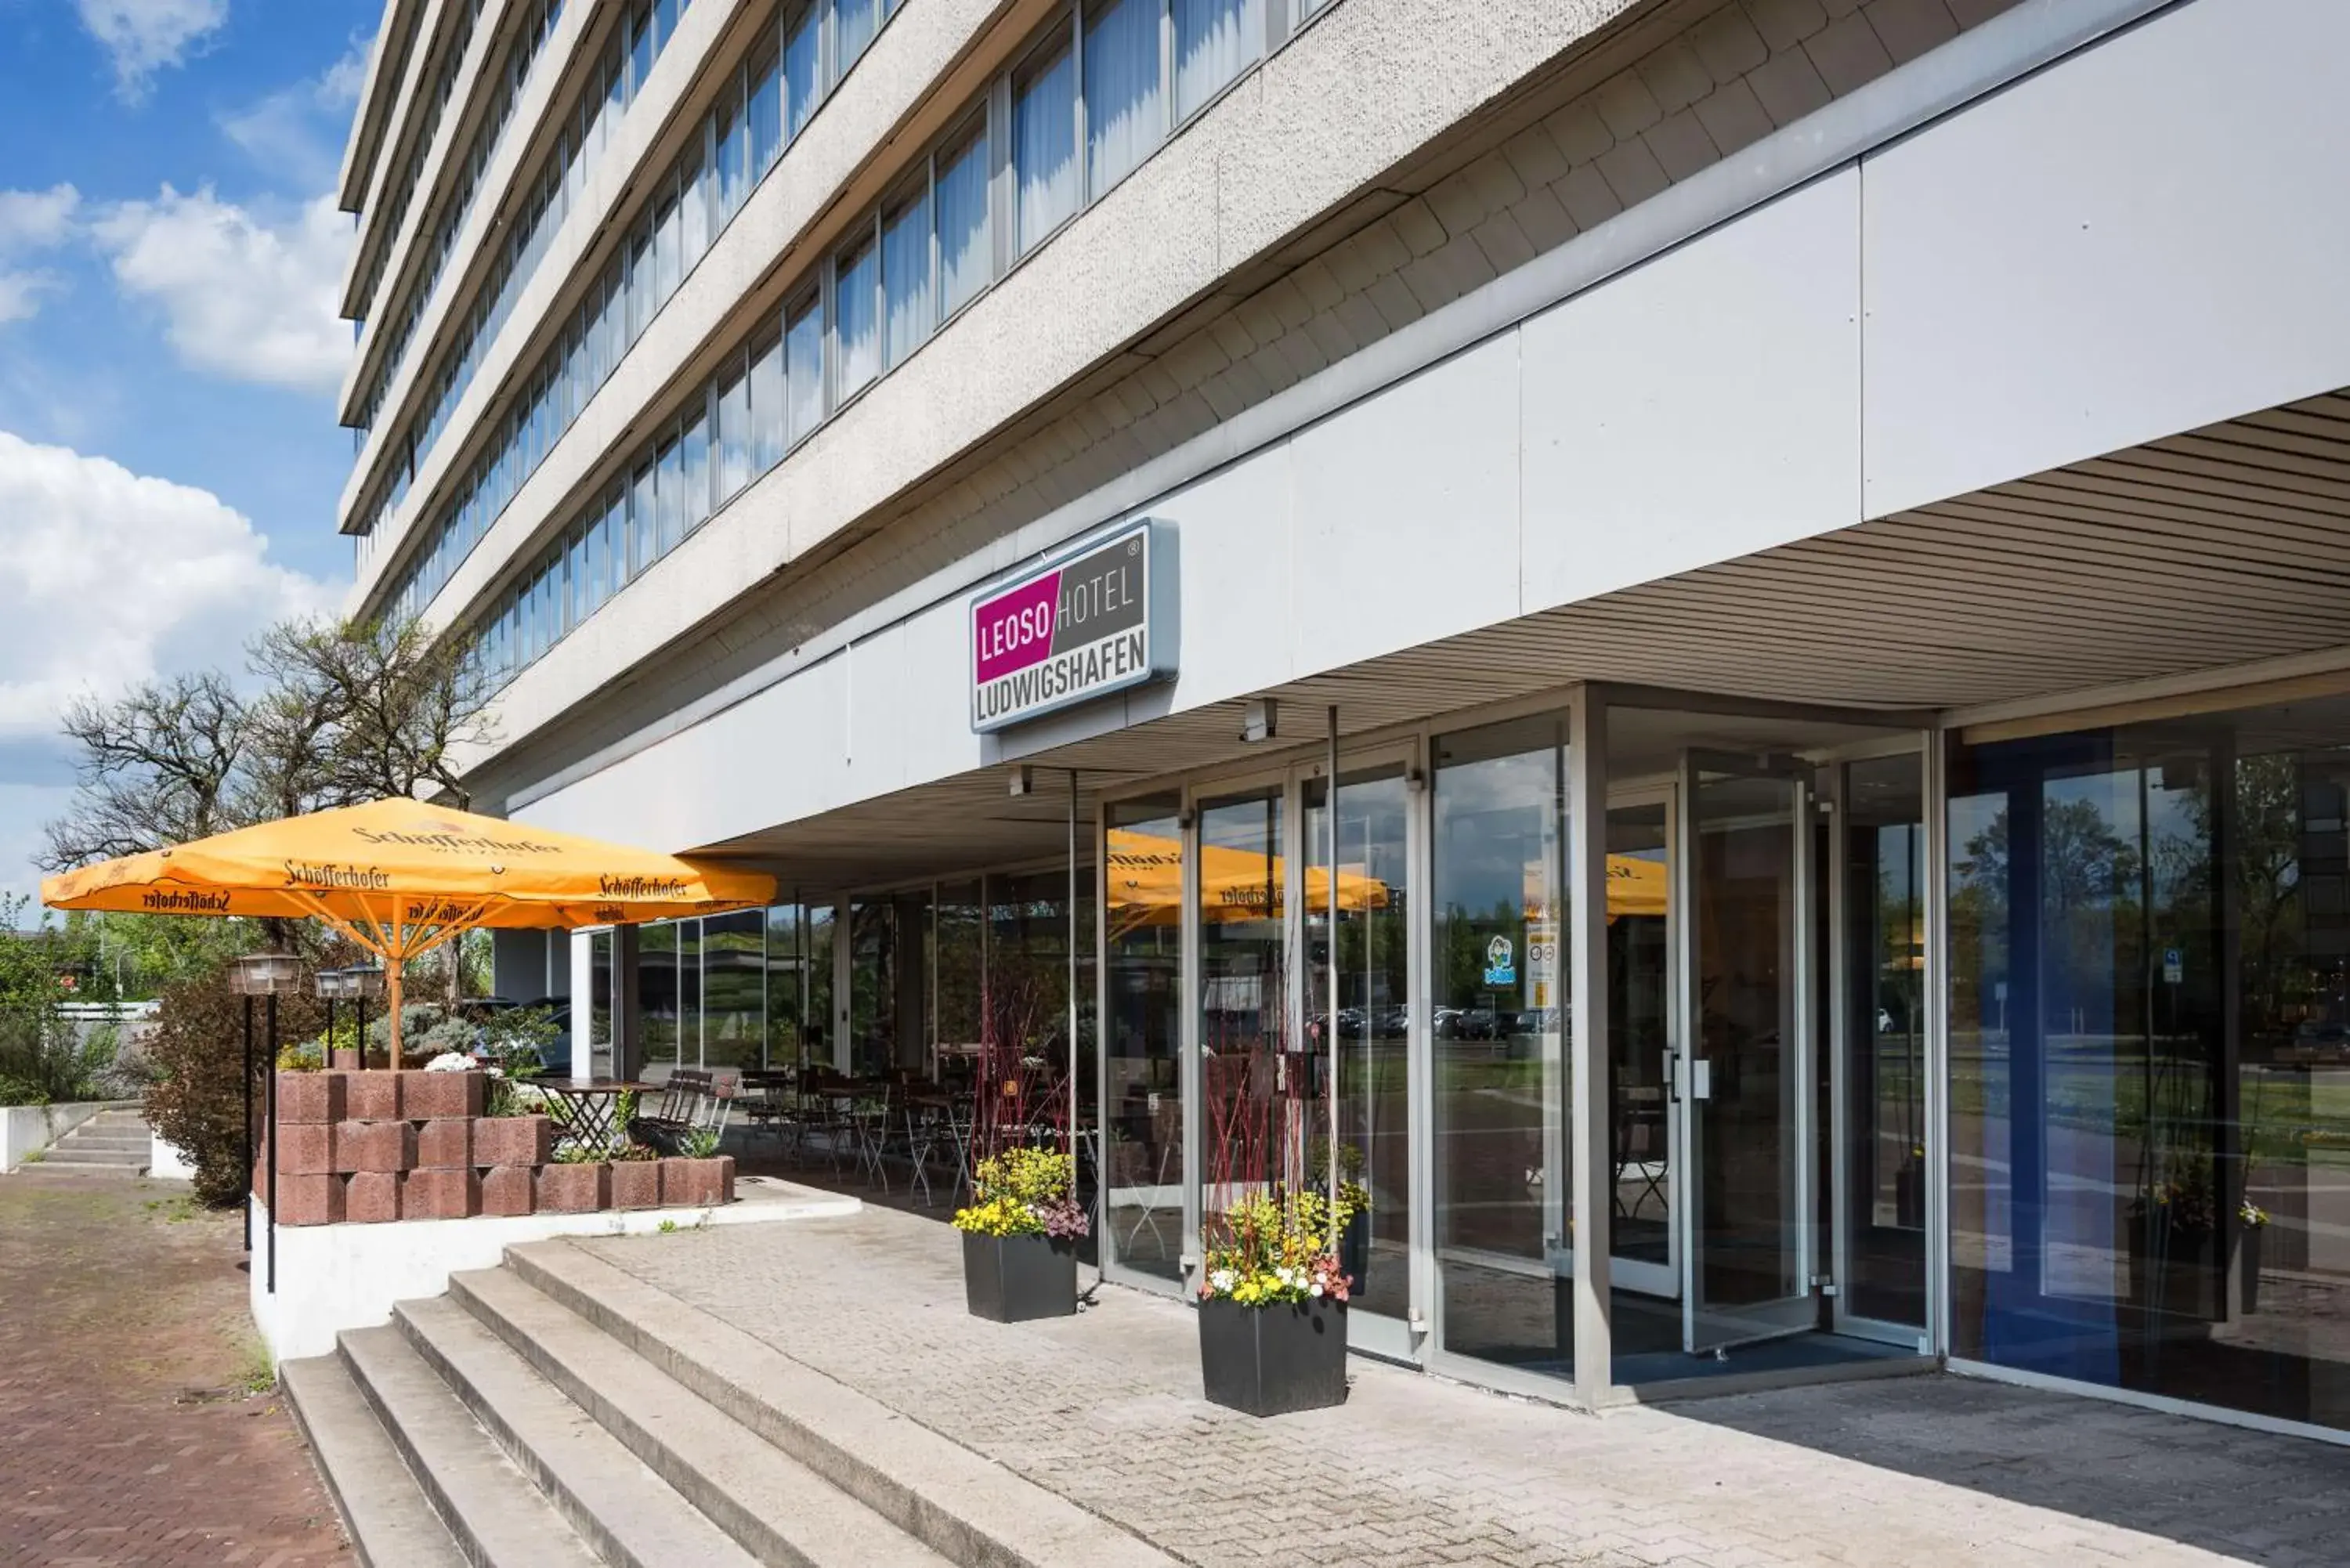 Property building in Leoso Hotel Ludwigshafen